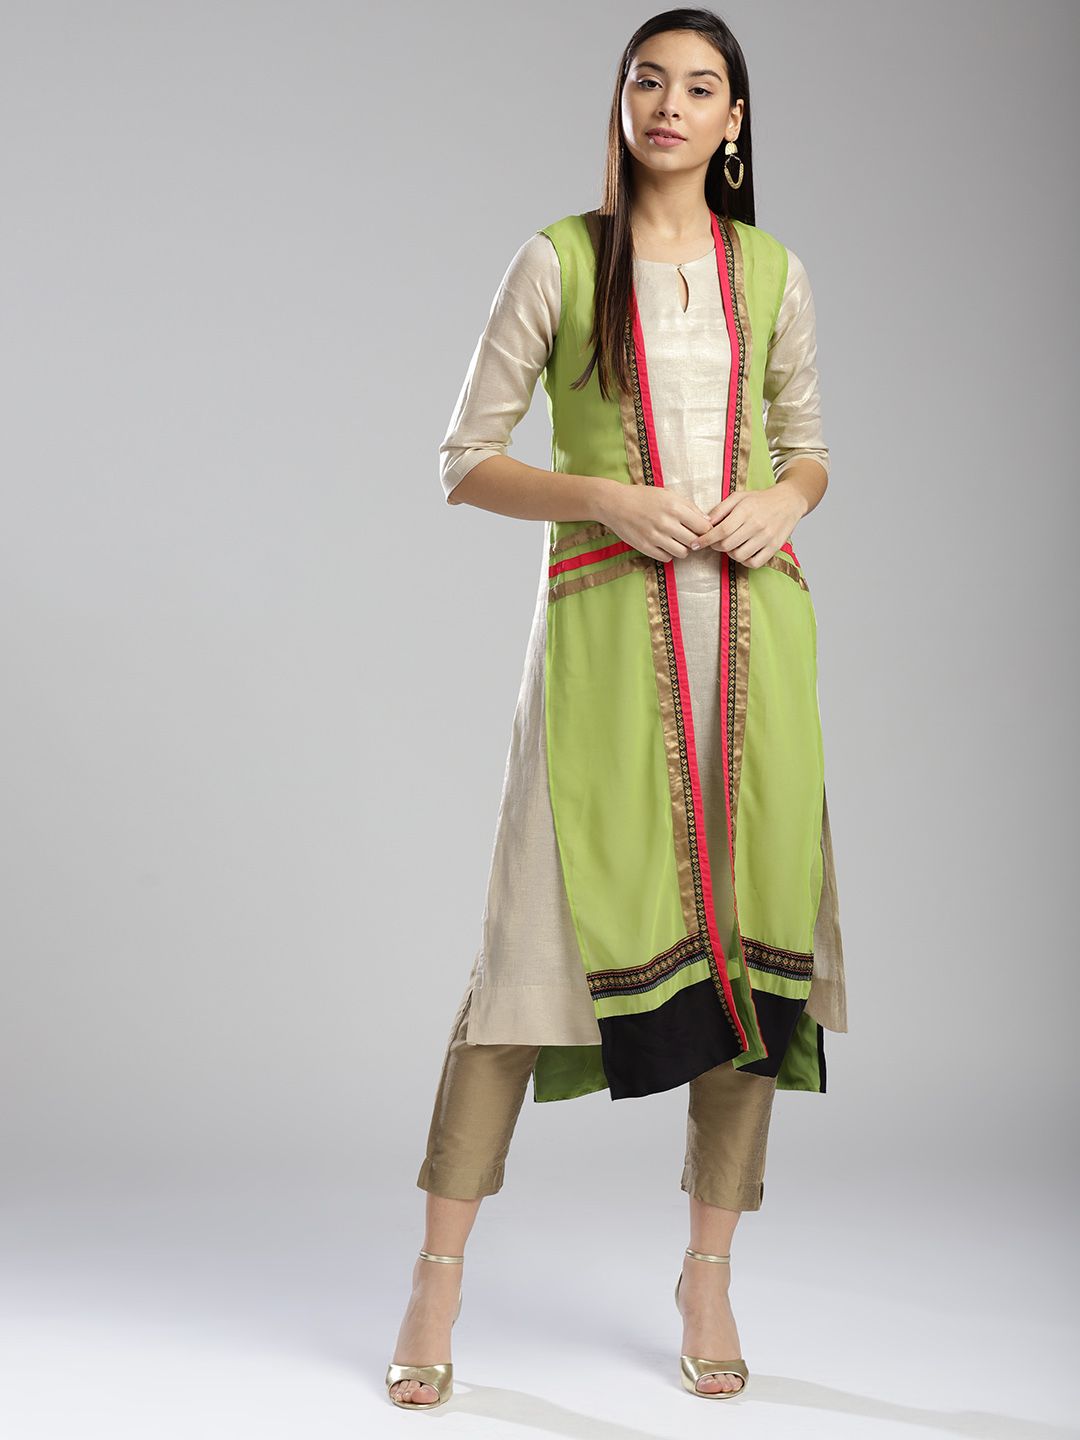 W Green Sheer High Slit Longline Ethnic Jacket Price in India